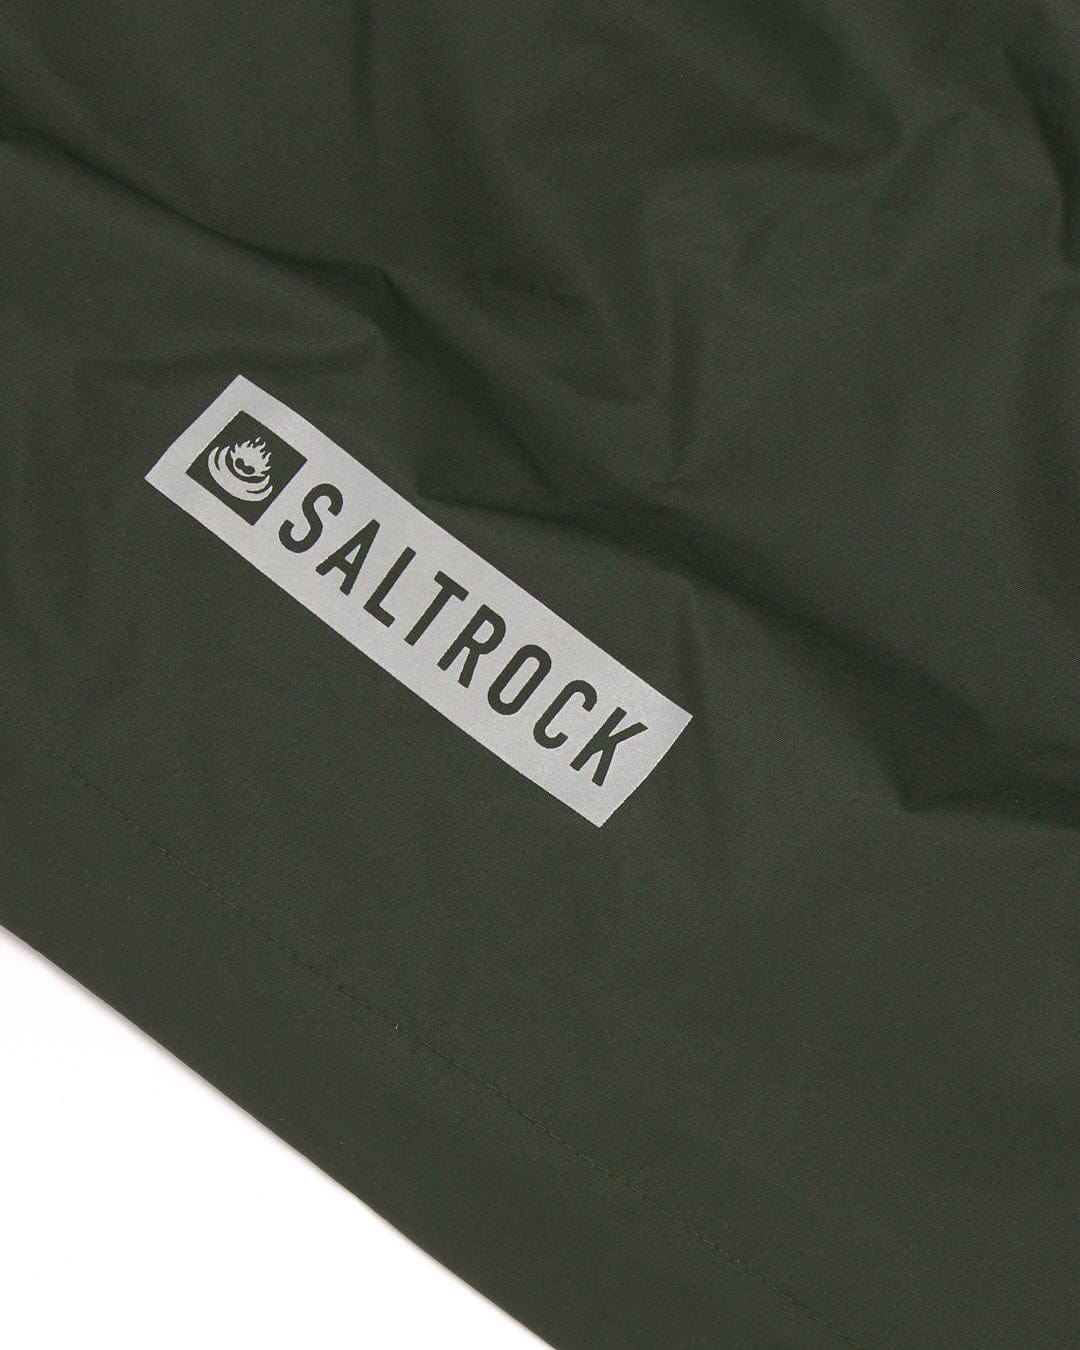 Green fabric with a white Saltrock brand label, made from the Recycled Four Seasons Changing Robe - Green/Aztec.